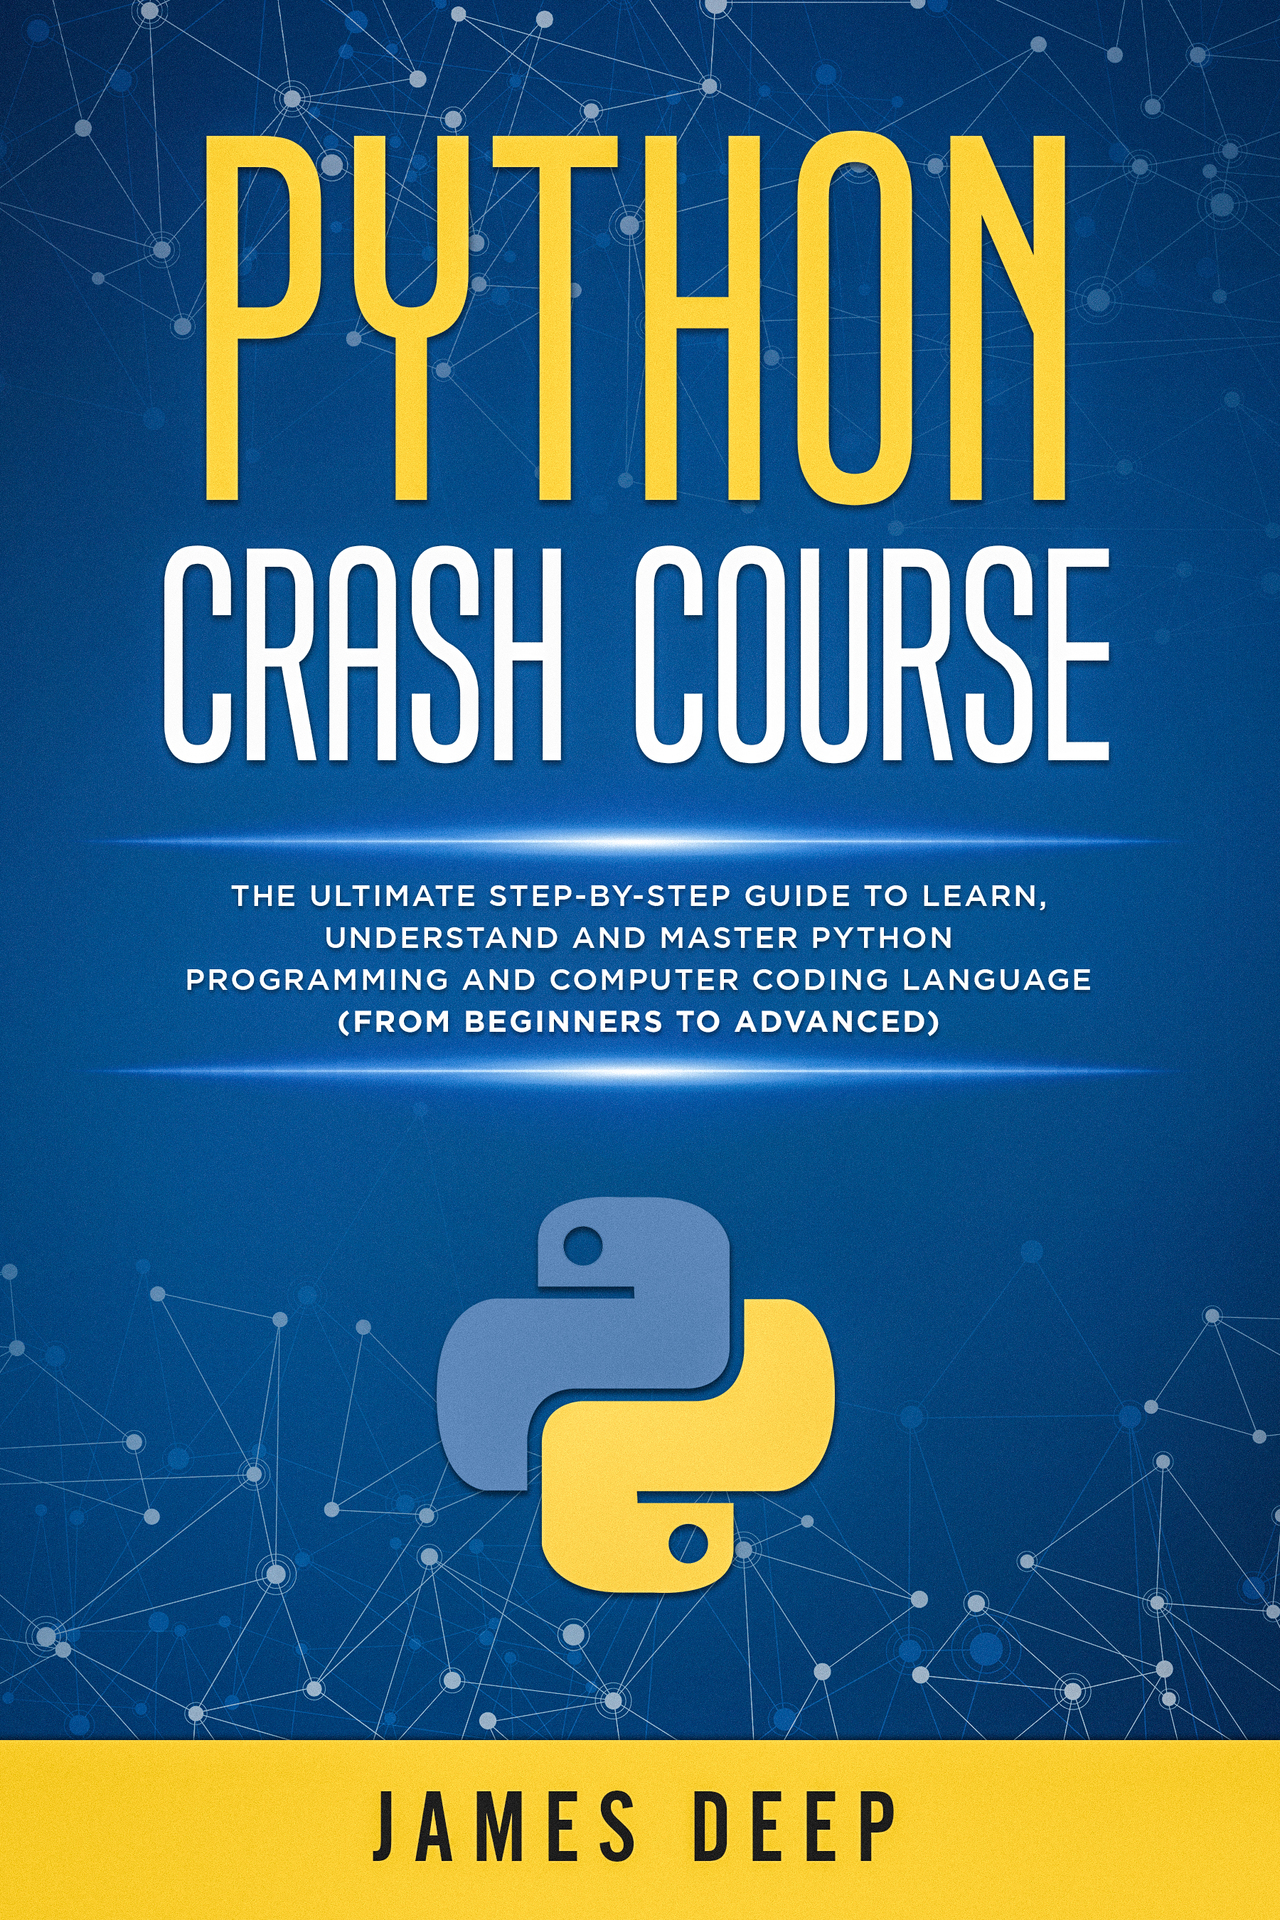 Python Crash Course: The Ultimate Step-By-Step Guide to Learn, Understand, and Master Python Programming and Computer Coding Language (From Beginners to Advanced)